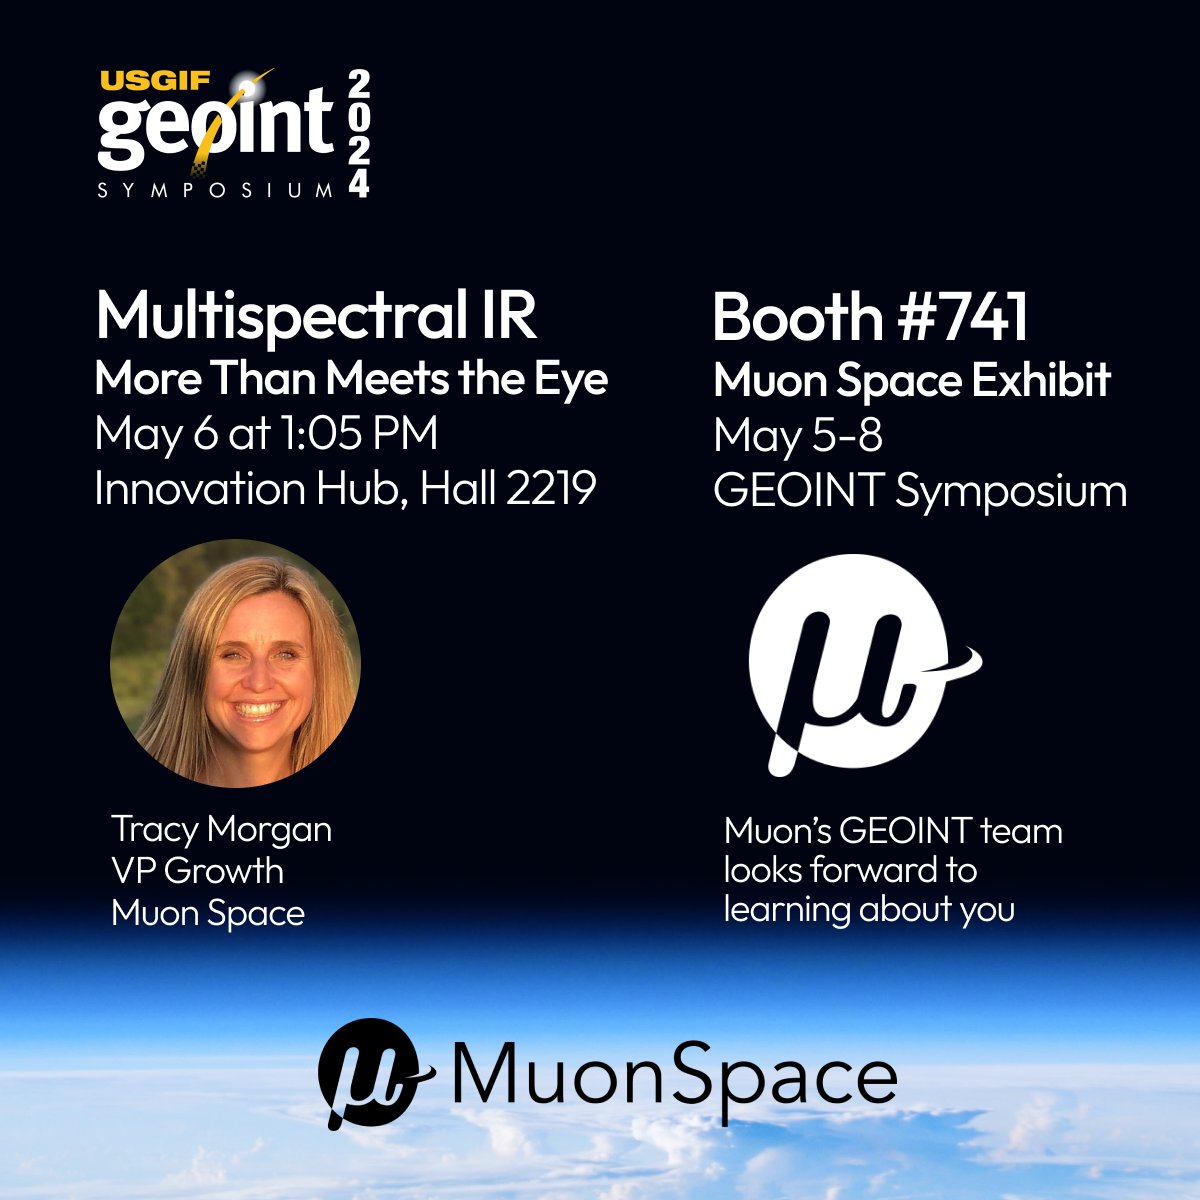 We are delighted to take part in the @USGIF GEOINT Symposium, May 5th-8th. See us at Booth #741. Tracy Morgan's lightning talk, 'Multispectral IR - More than meets the eye,' is Monday, May 6th at 1:05 PM, in the Innovation Hub, Hall 2219. Meet with us: info@muonspace.com.